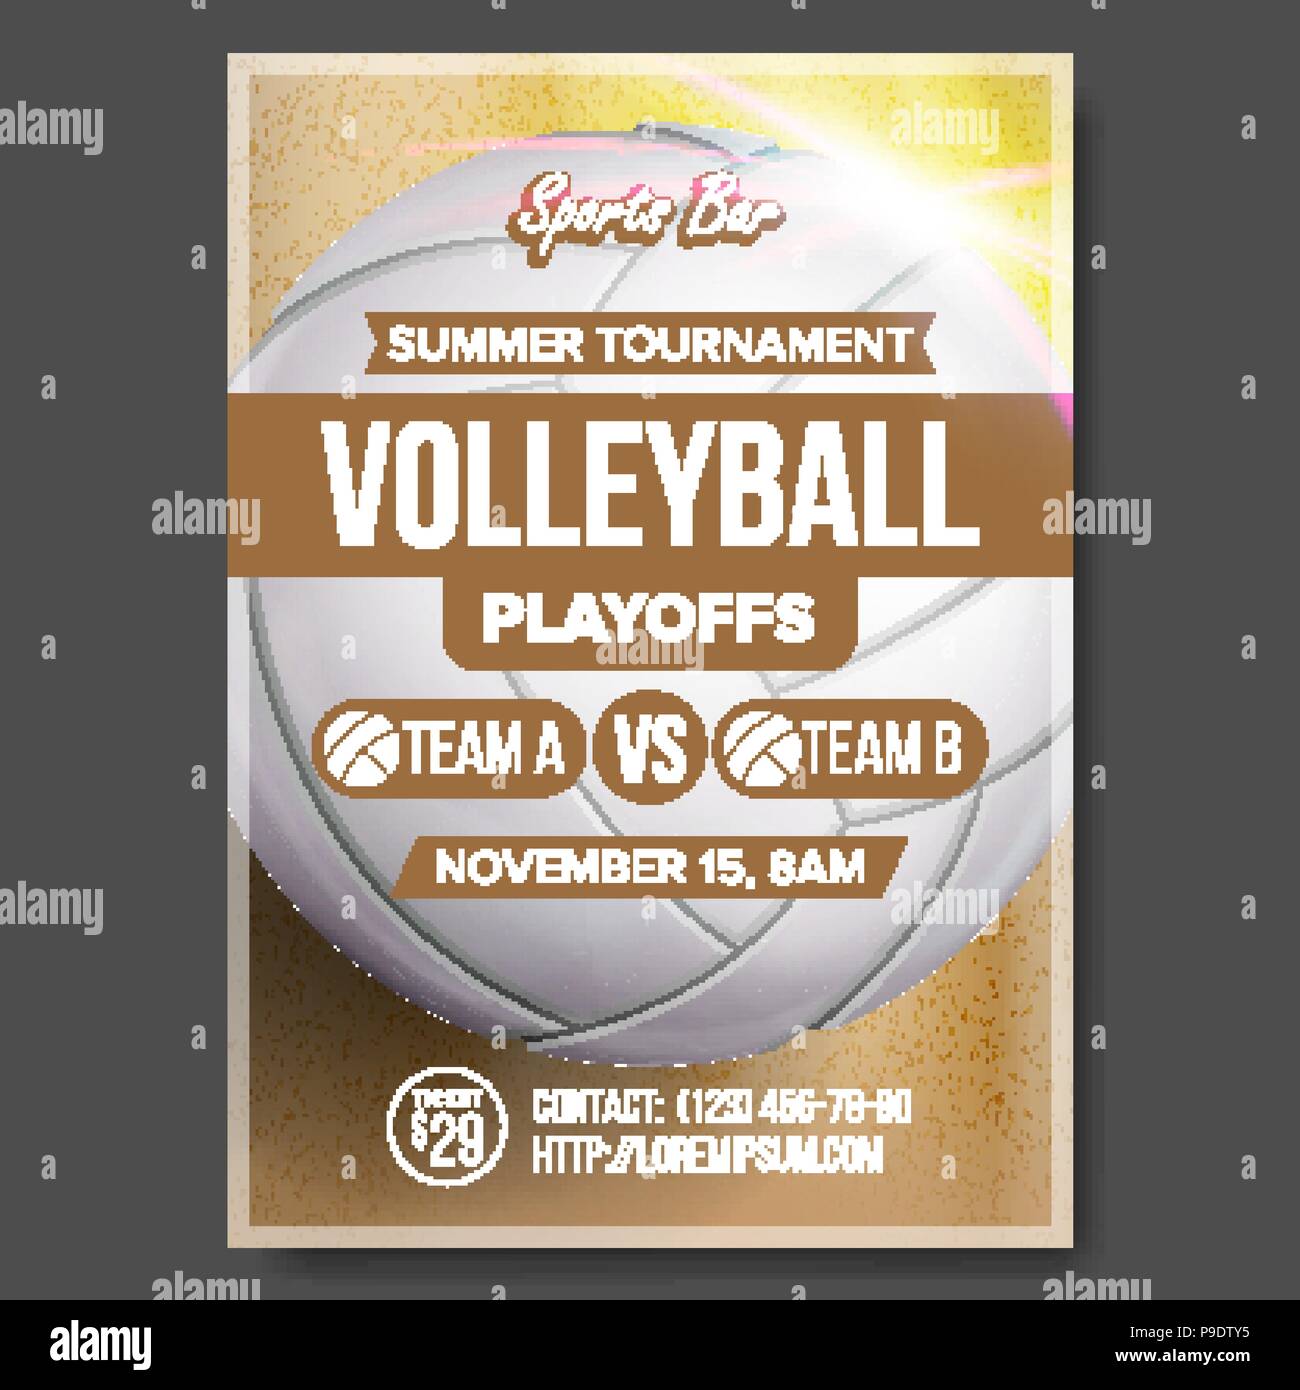 Volleyball Poster Vector. Volleyball Ball. Sand Beach. Design For Sport Bar Promotion. Vertical Volleyball Club. Cafe, Pub Flyer. Summer Game. Championship Blank Invitation Illustration Stock Vector